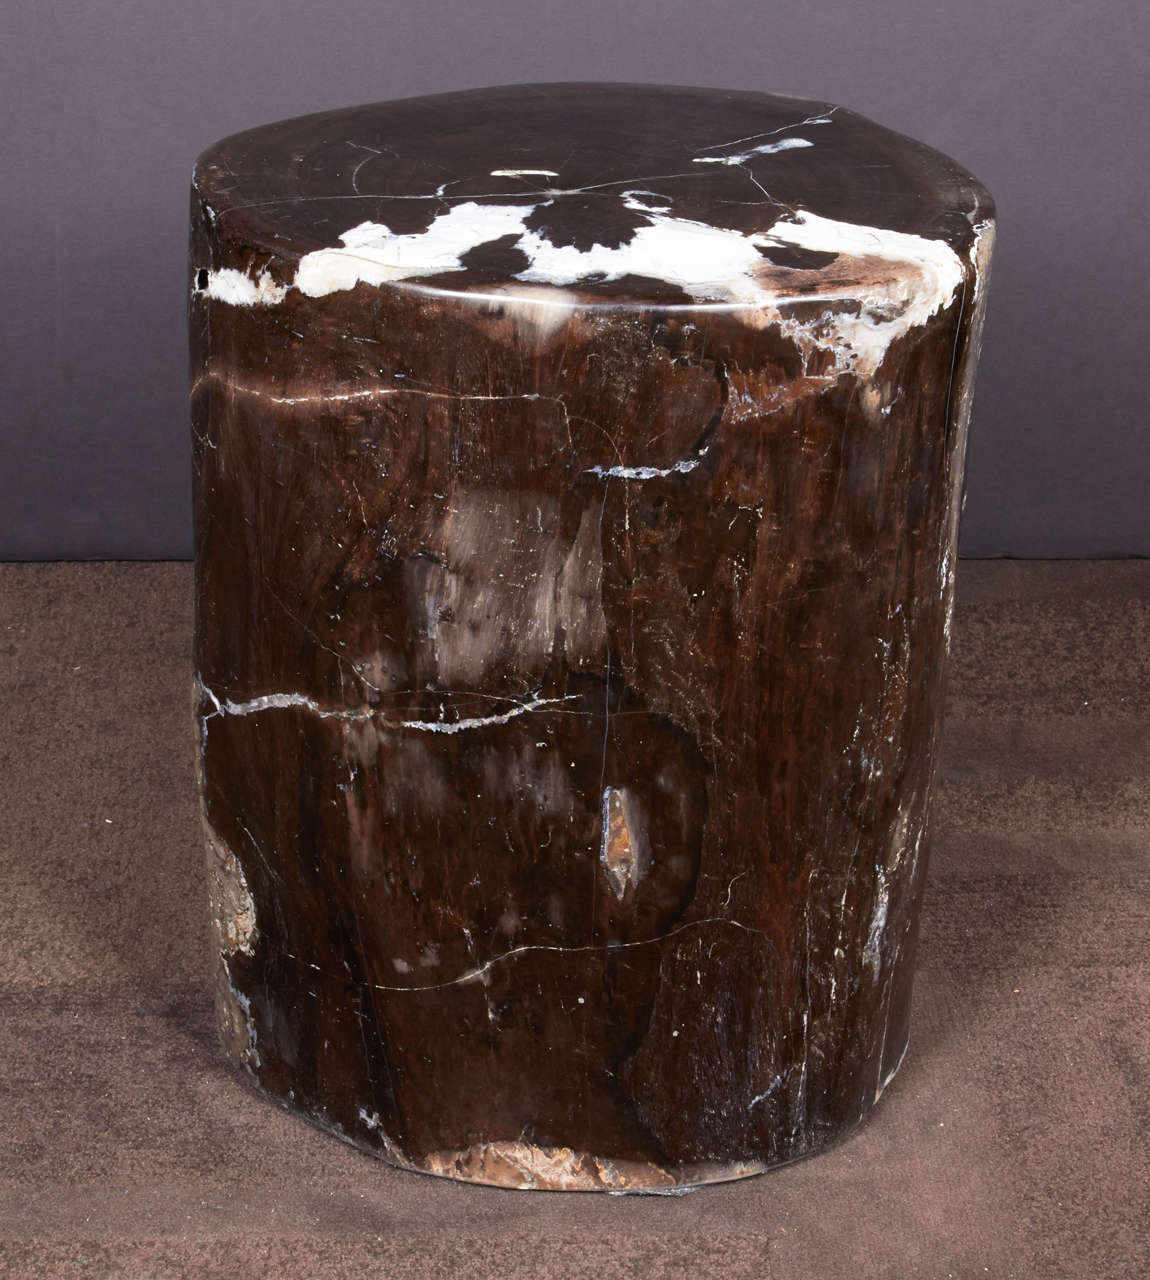 Remarkable example of wood petrification. Naturally fossilized throughout millions of years. Outstanding quality that has been hand-cut and polished and can double as a stool or seating. Organic free-form shape predominantly in hues of black onyx